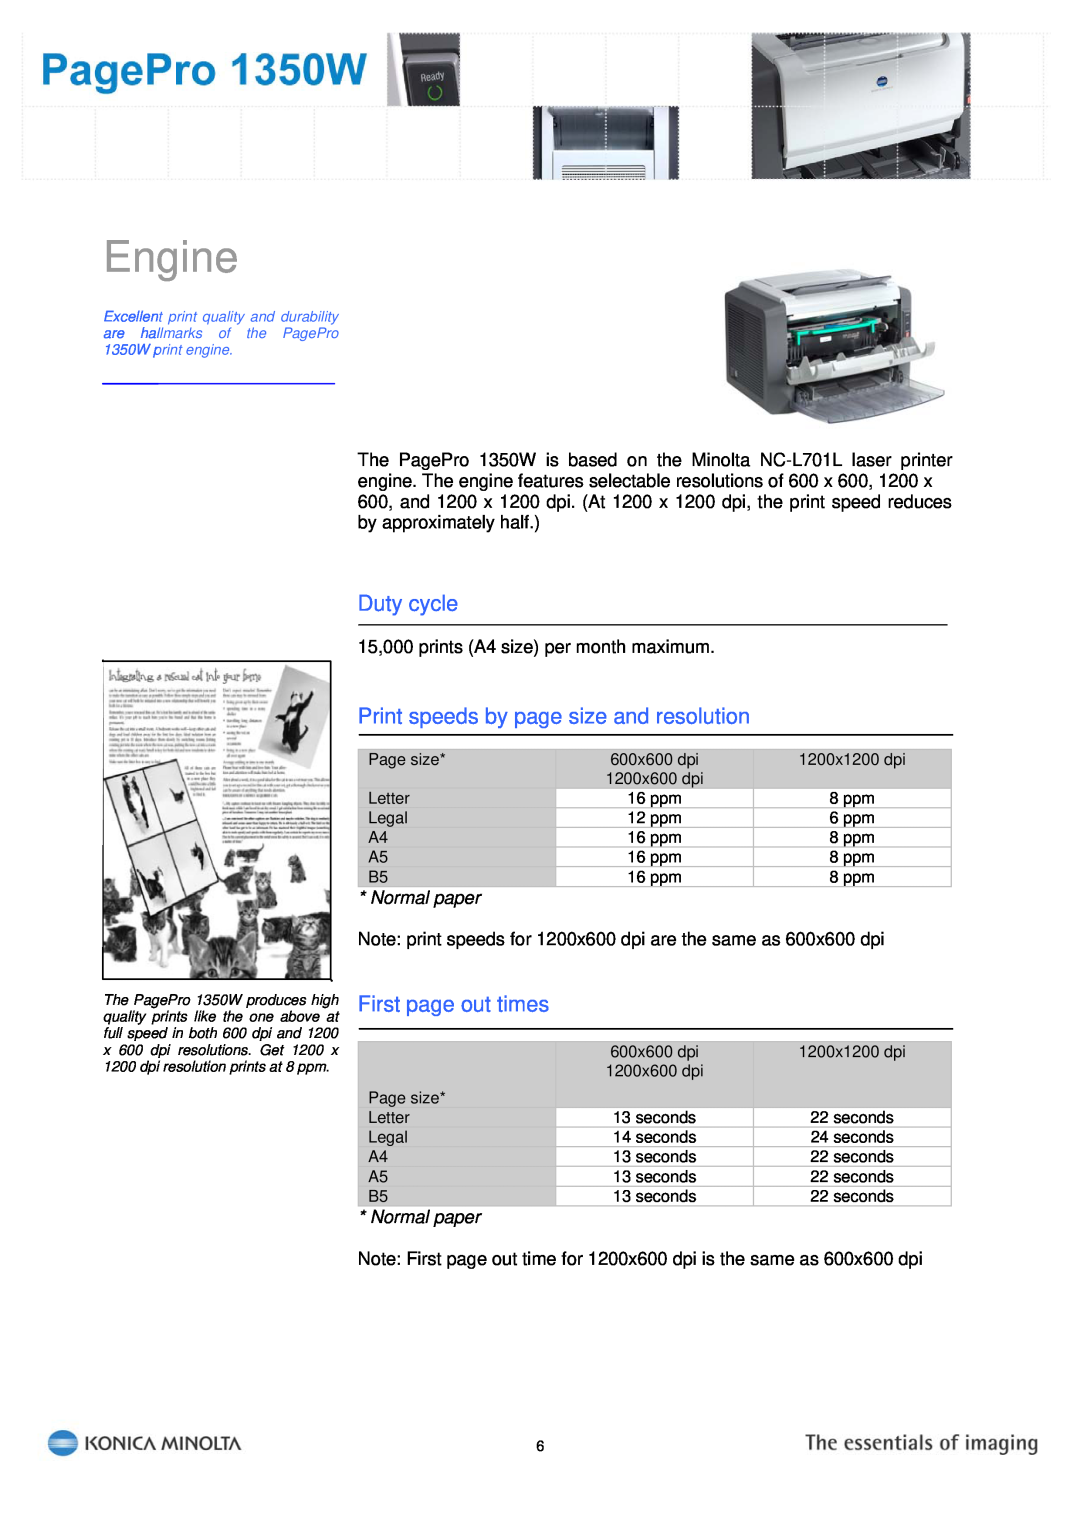 Konica Minolta PagePro 1350W manual Engine, Duty cycle, Print speeds by page size and resolution, First page out times 